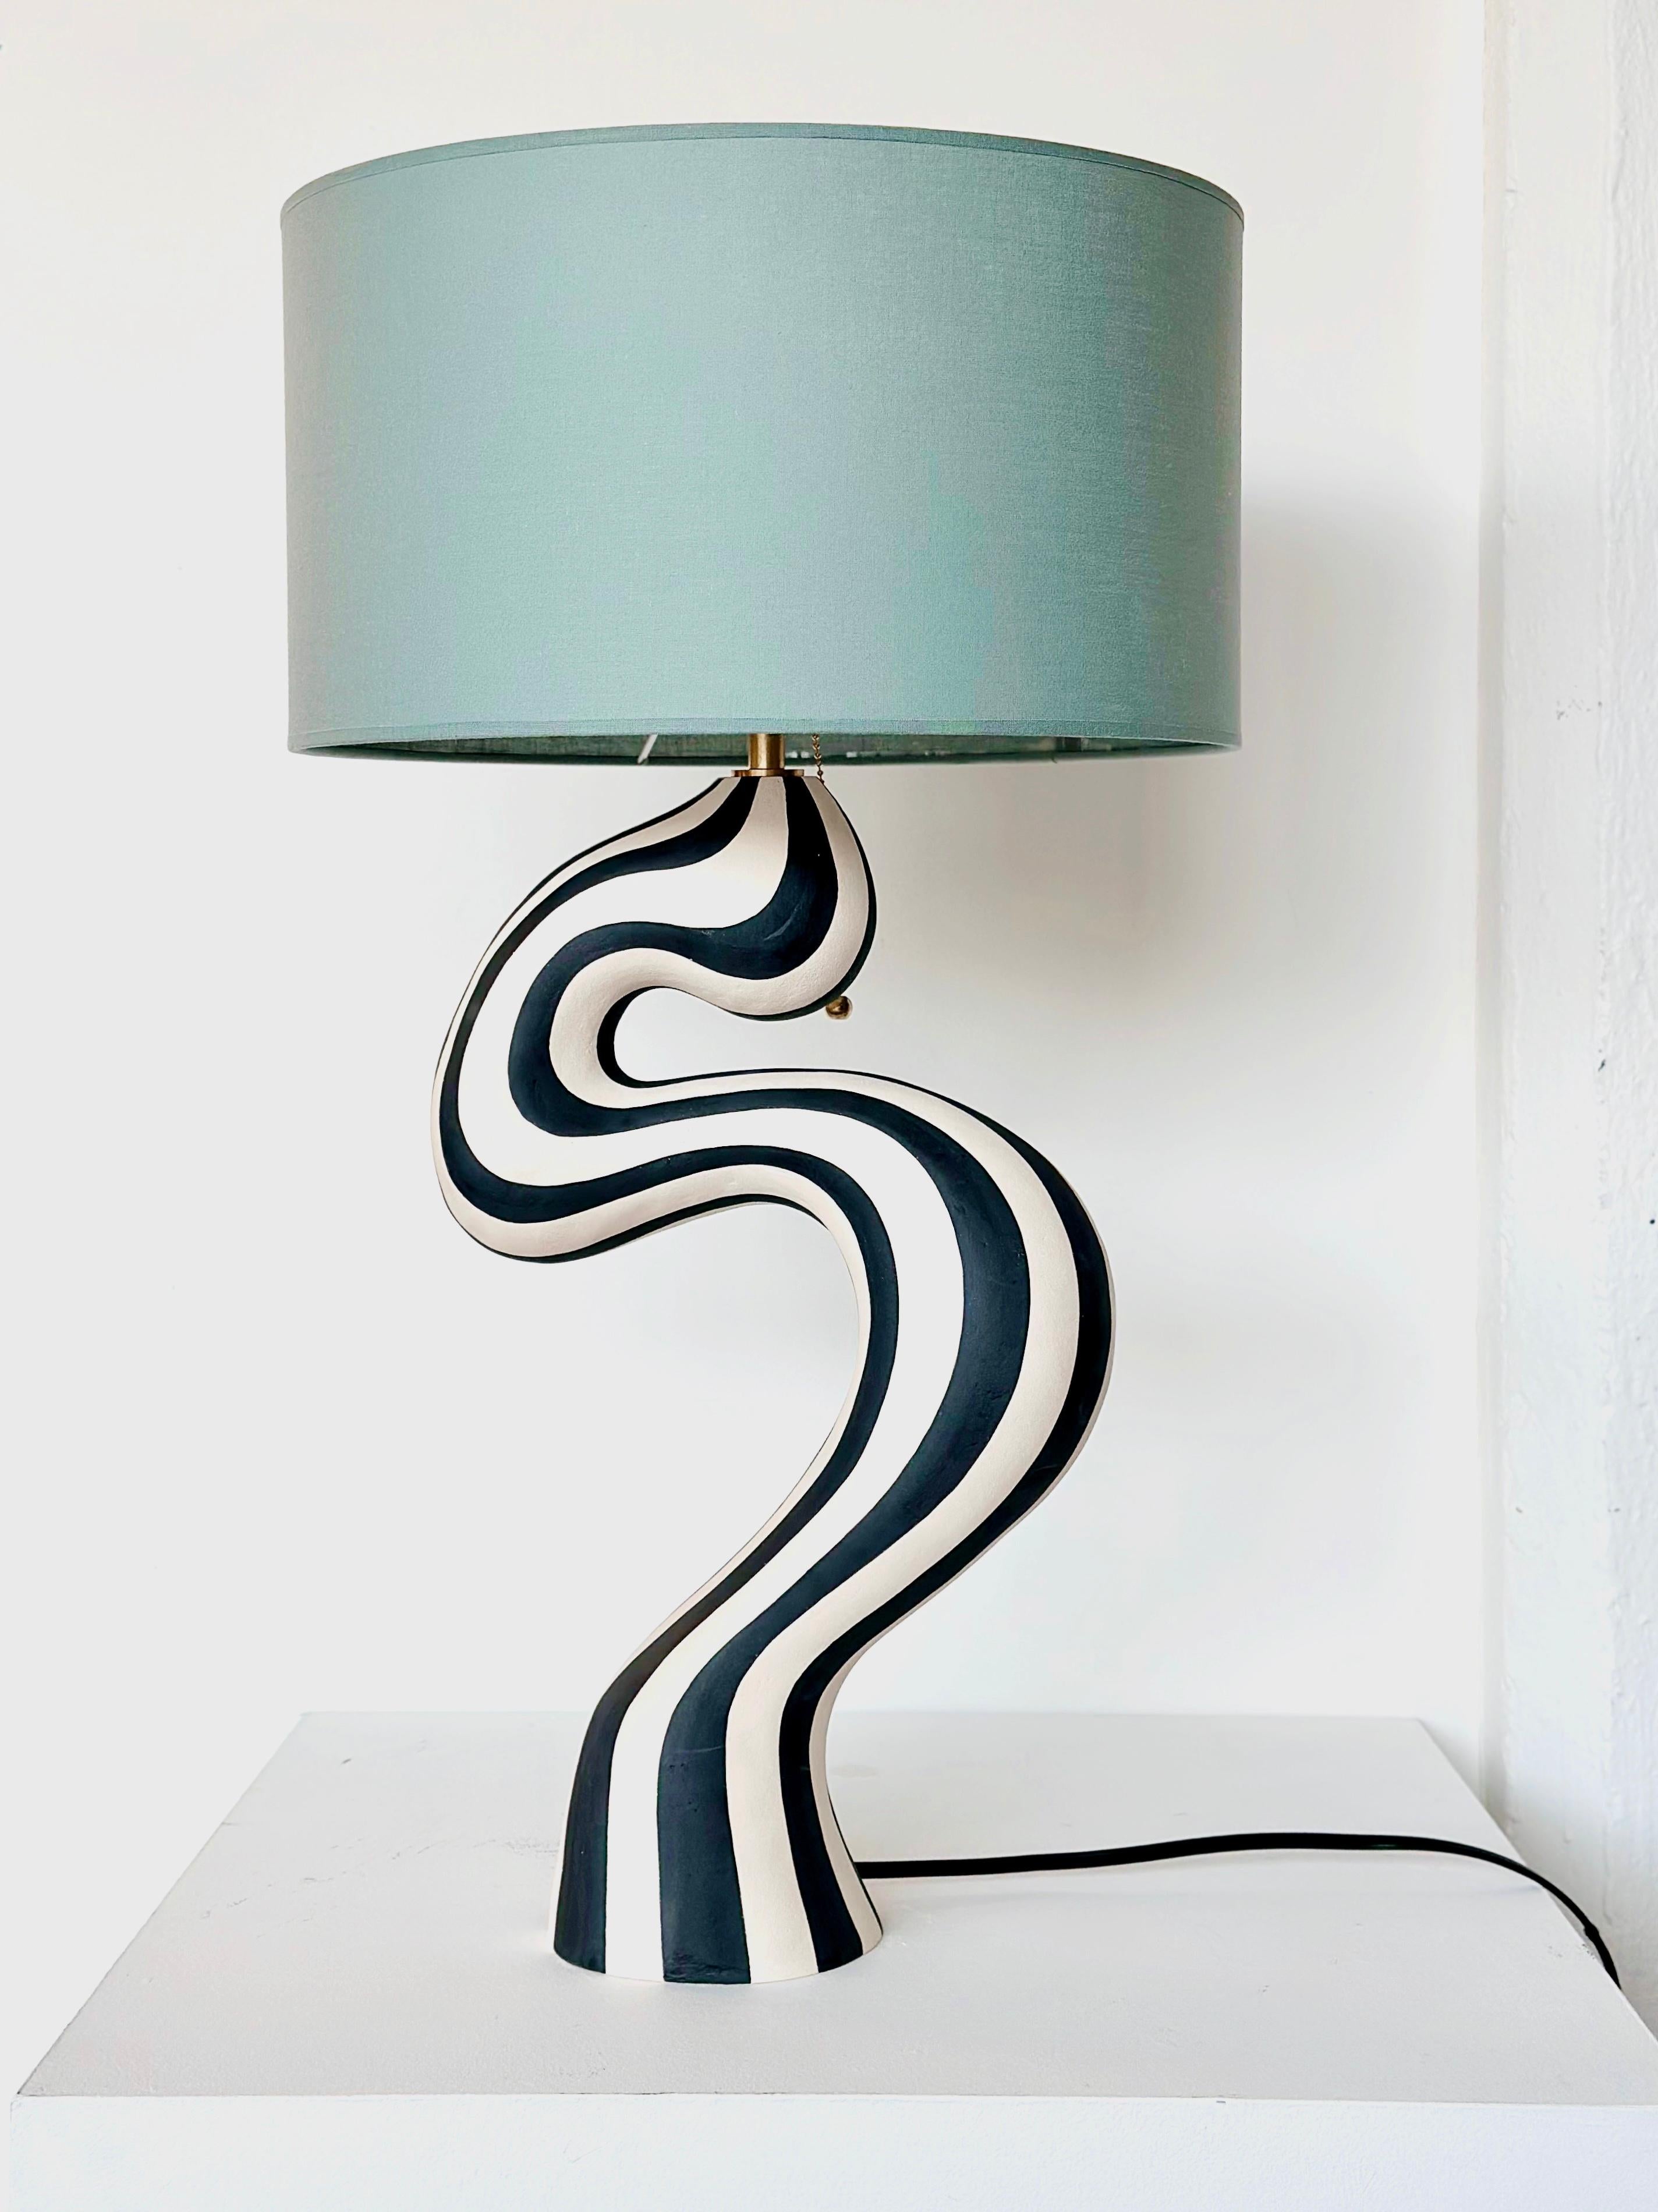 Handcrafted lamp base by Norwegian artist Johanne Birkeland. The lamp base is hand built in white stoneware clay, and hand decorated with black matte glaze. 

The lamp comes with North American wiring and brass E26 socket.

The Norwegian artist, who